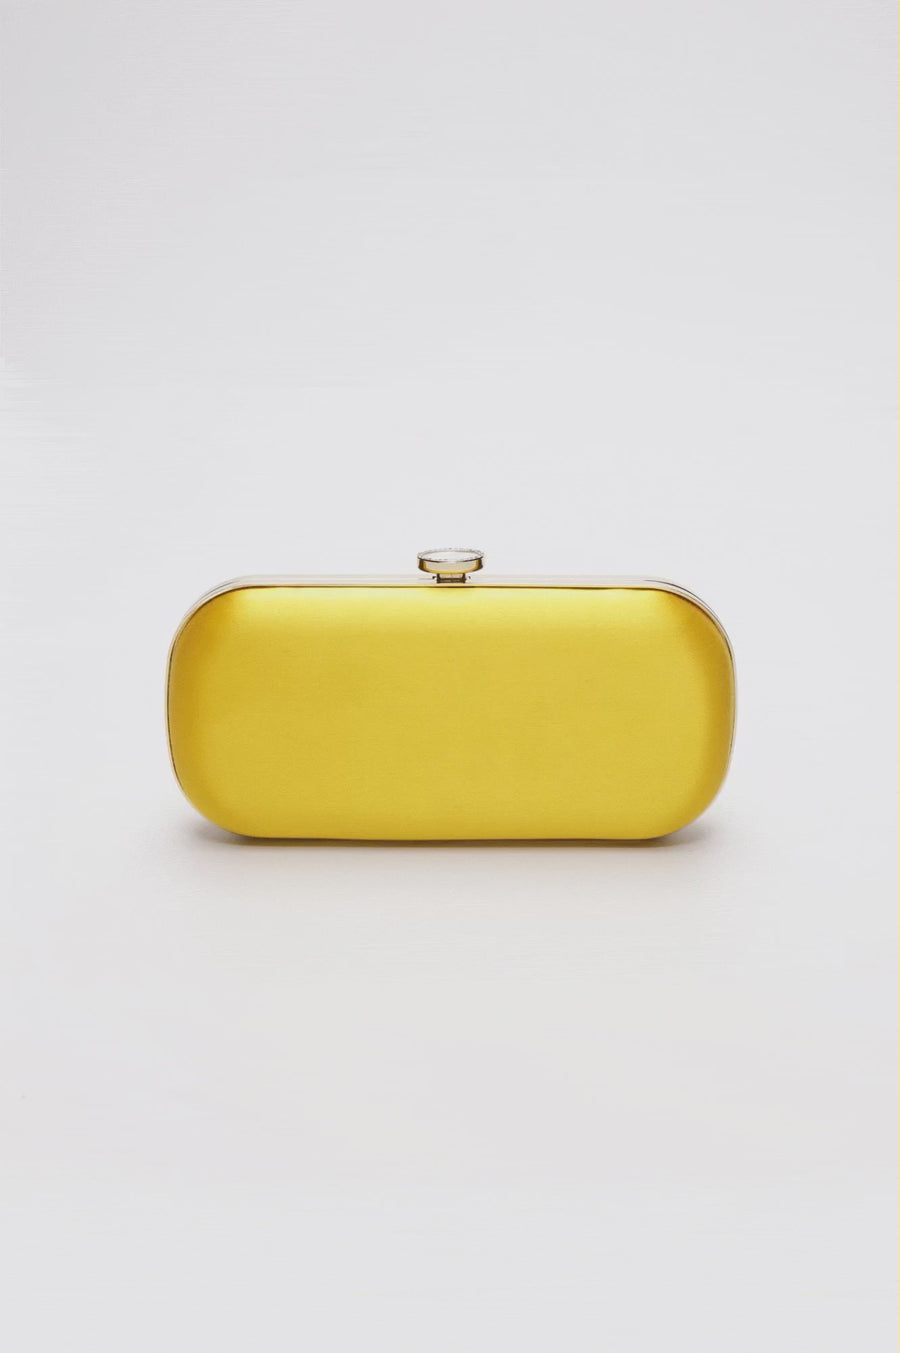 360 view of yellow, Limoncello Bella Clutch in gold hardware accents.